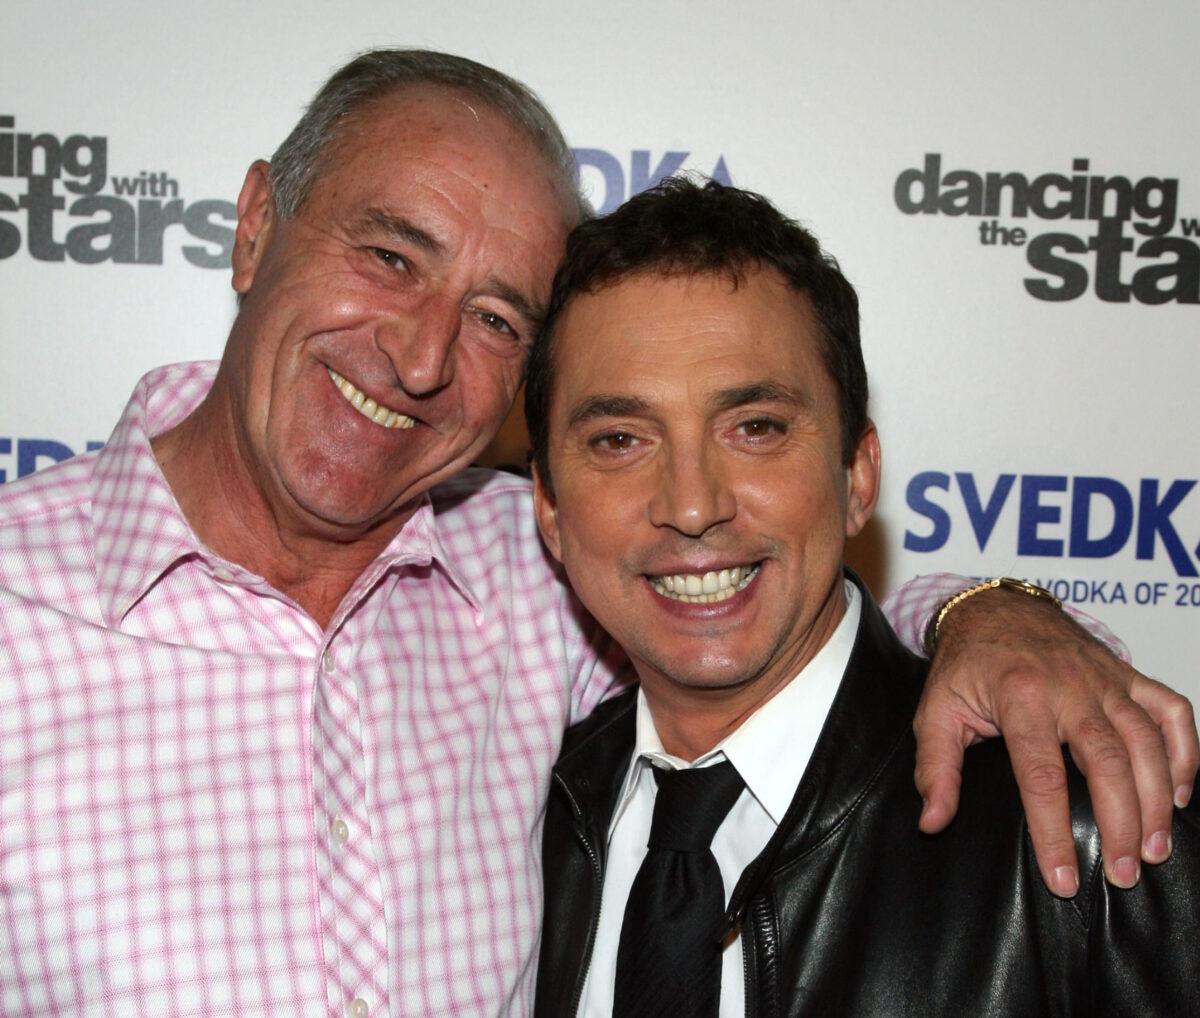 Len Goodman and Bruno Tonioli pose at the "Dancing With The Stars Finale" after party held at The Day After club in Hollywood, Calif., on Nov. 27, 2007. (Frazer Harrison/Getty Images)